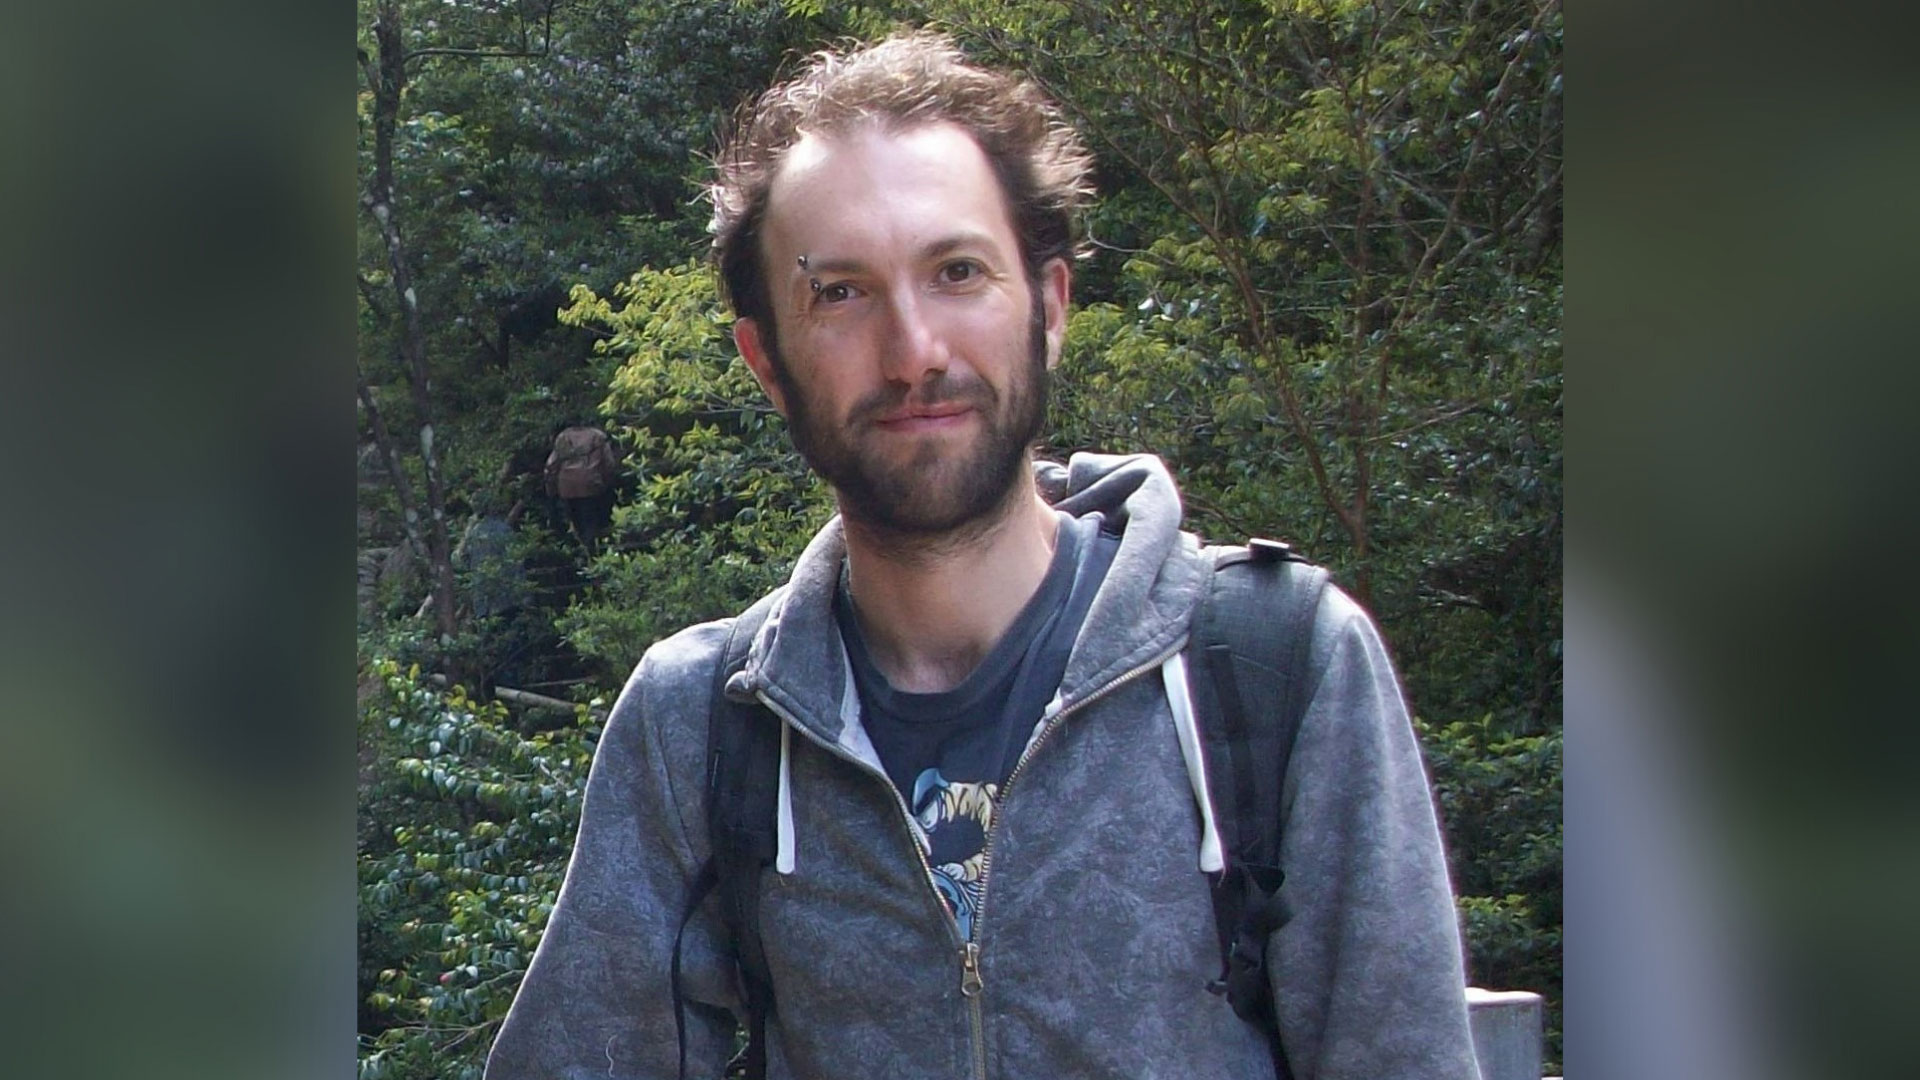 Andrew is a white male with brown hair and a beard, with an eyebrow piercing and visible difference. He is wearing a blue t-shirt with a darker blue hoodie over the top.